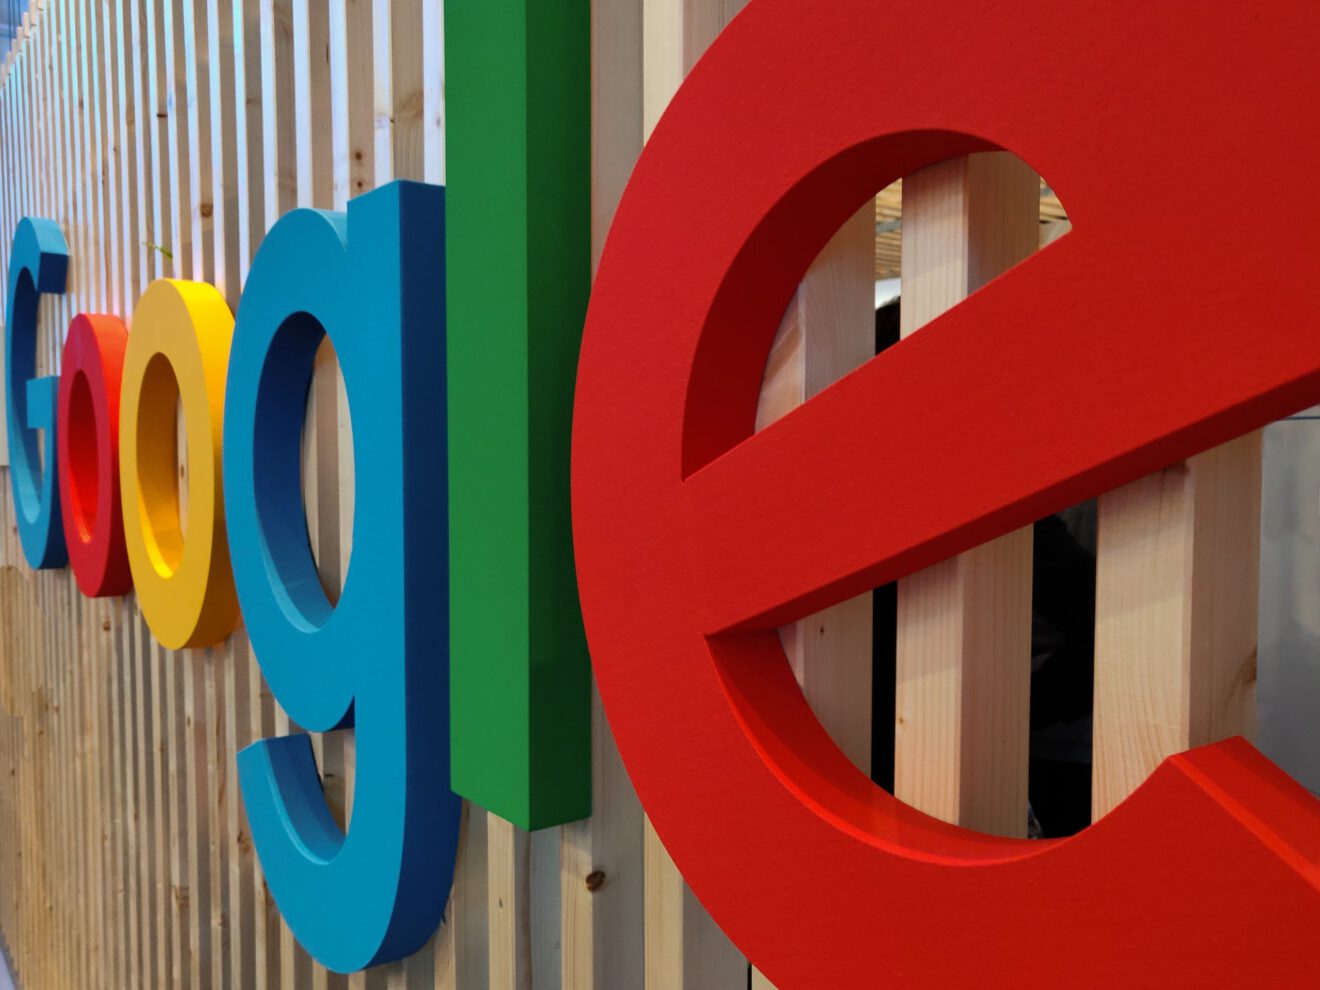 5 easy changes Google could make to be less monopolistic